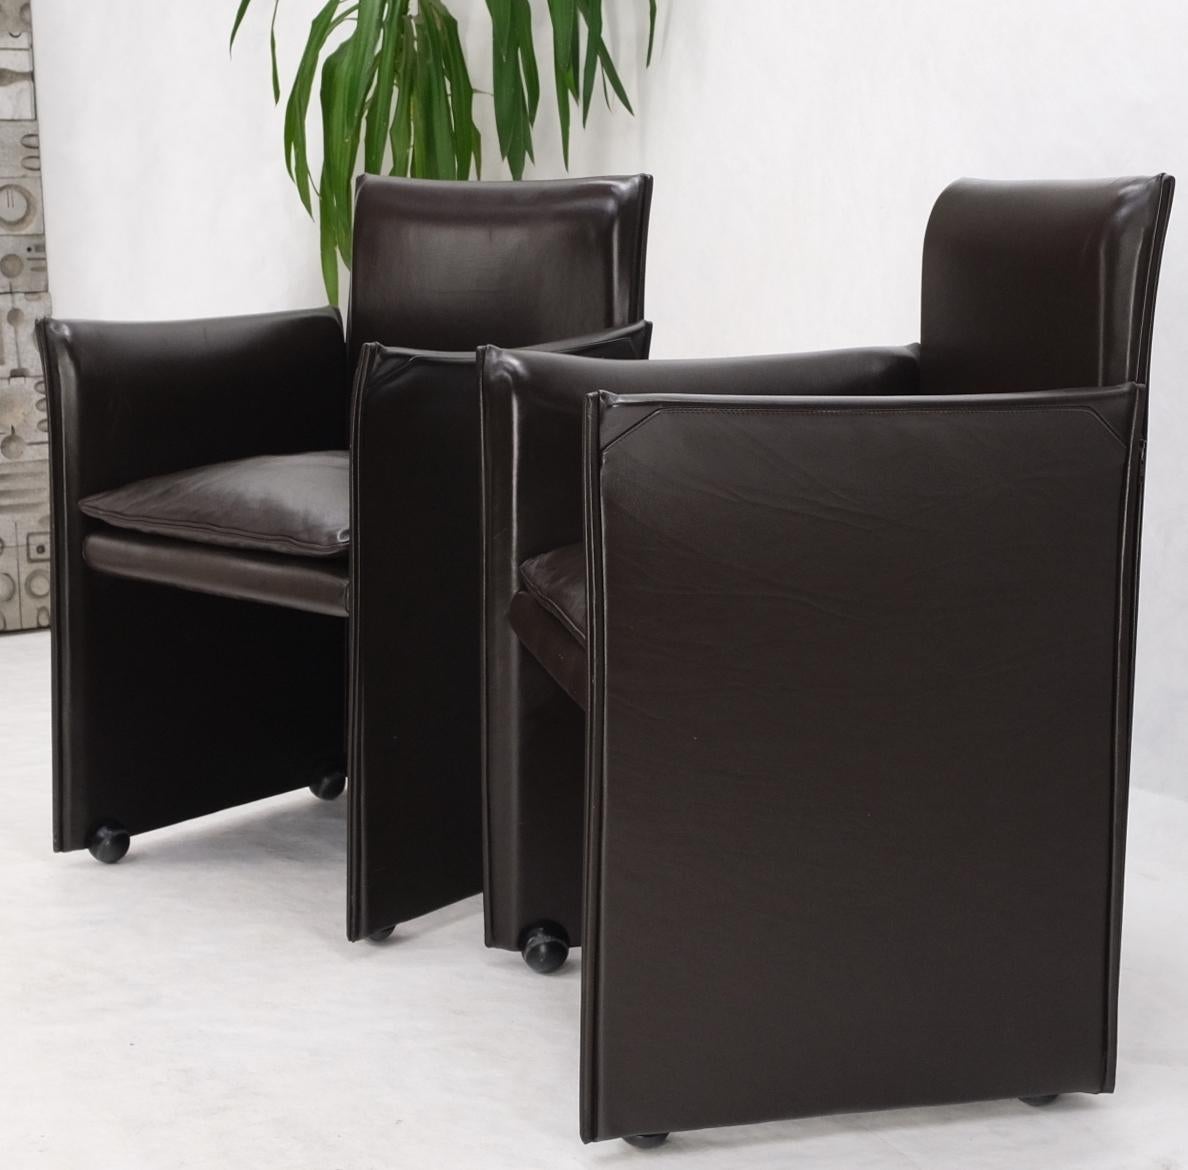 Pair of Dark Brown Plum Leather Break Side Chairs Mario Bellini for Cassina Mint For Sale 11